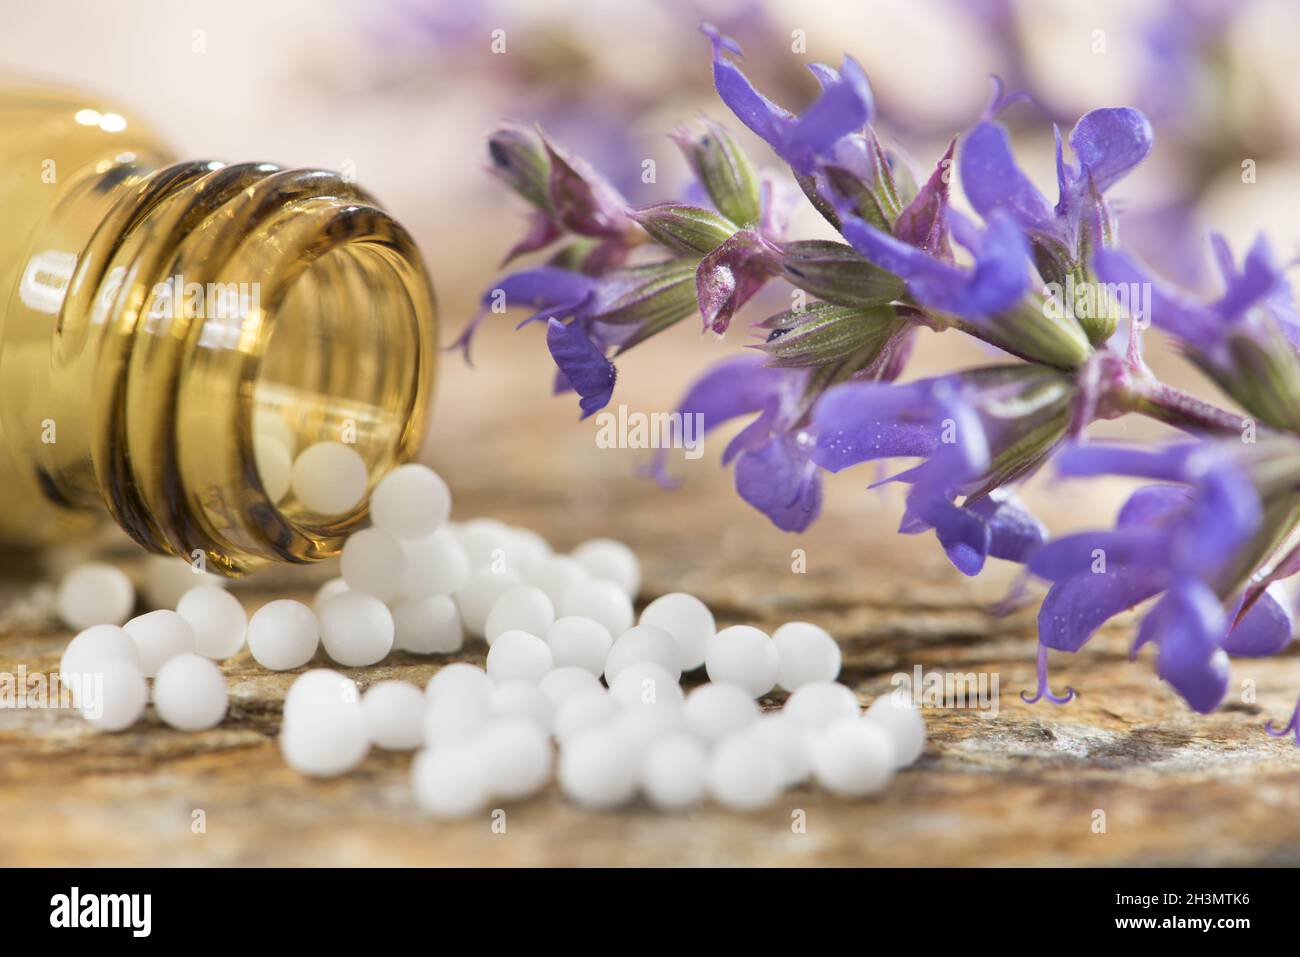 Alternative medicine with herbal and homeopathic pills Stock Photo